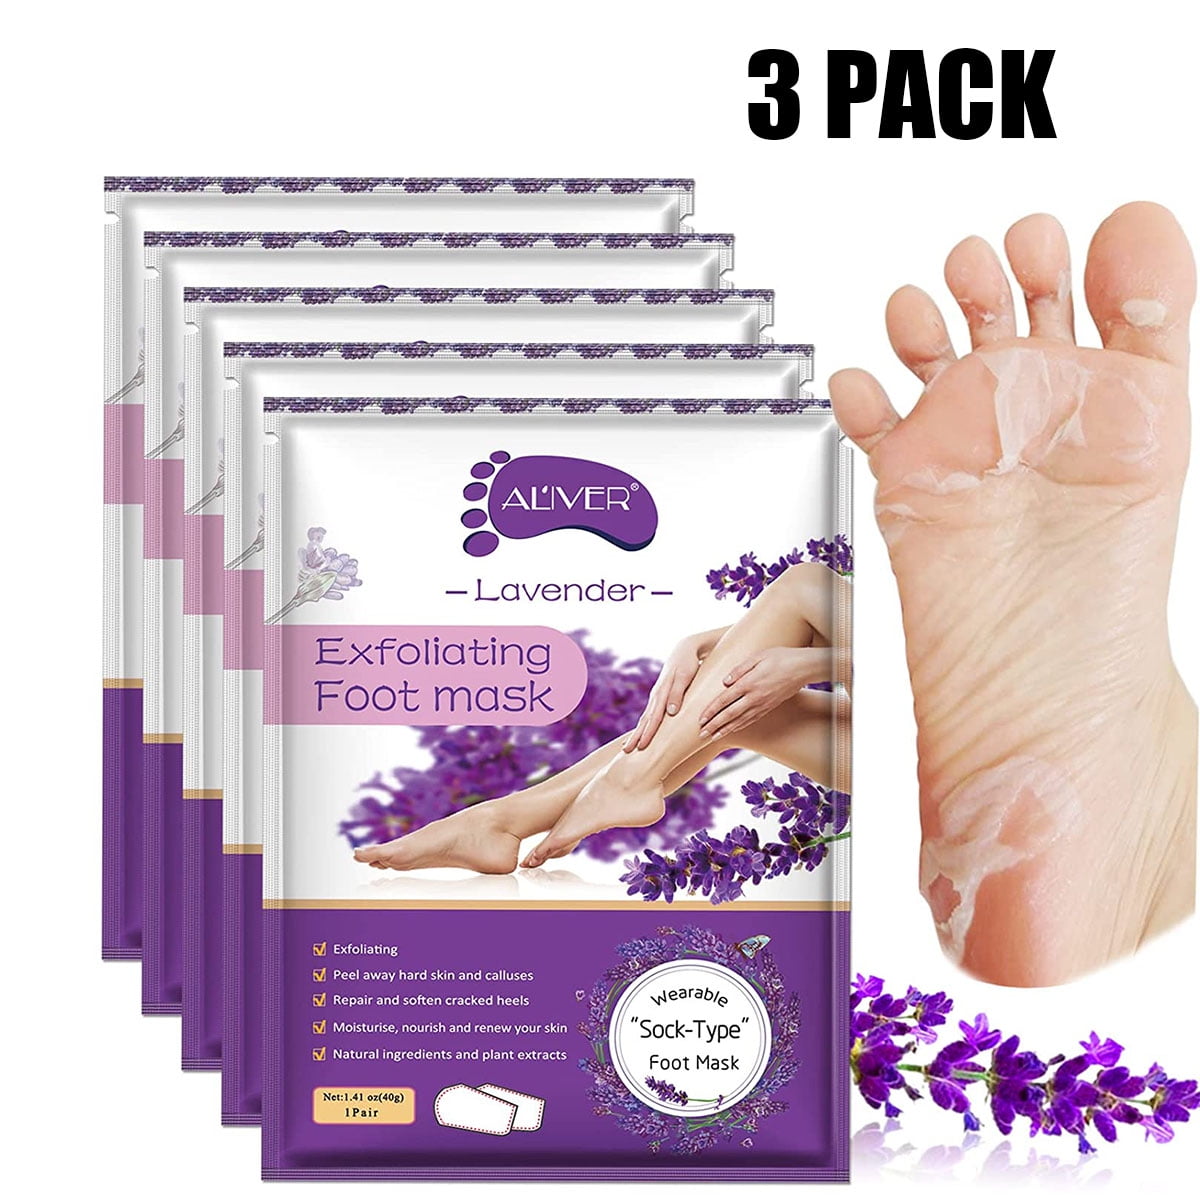  Baby Foot Peel Mask-Original Exfoliant Foot Peel-Callus Remover  for Rough Cracked Dry Feet-Dead Skin Remove-Foot Peeling Mask for Baby Soft  Feet - Lavender Scented : Beauty & Personal Care